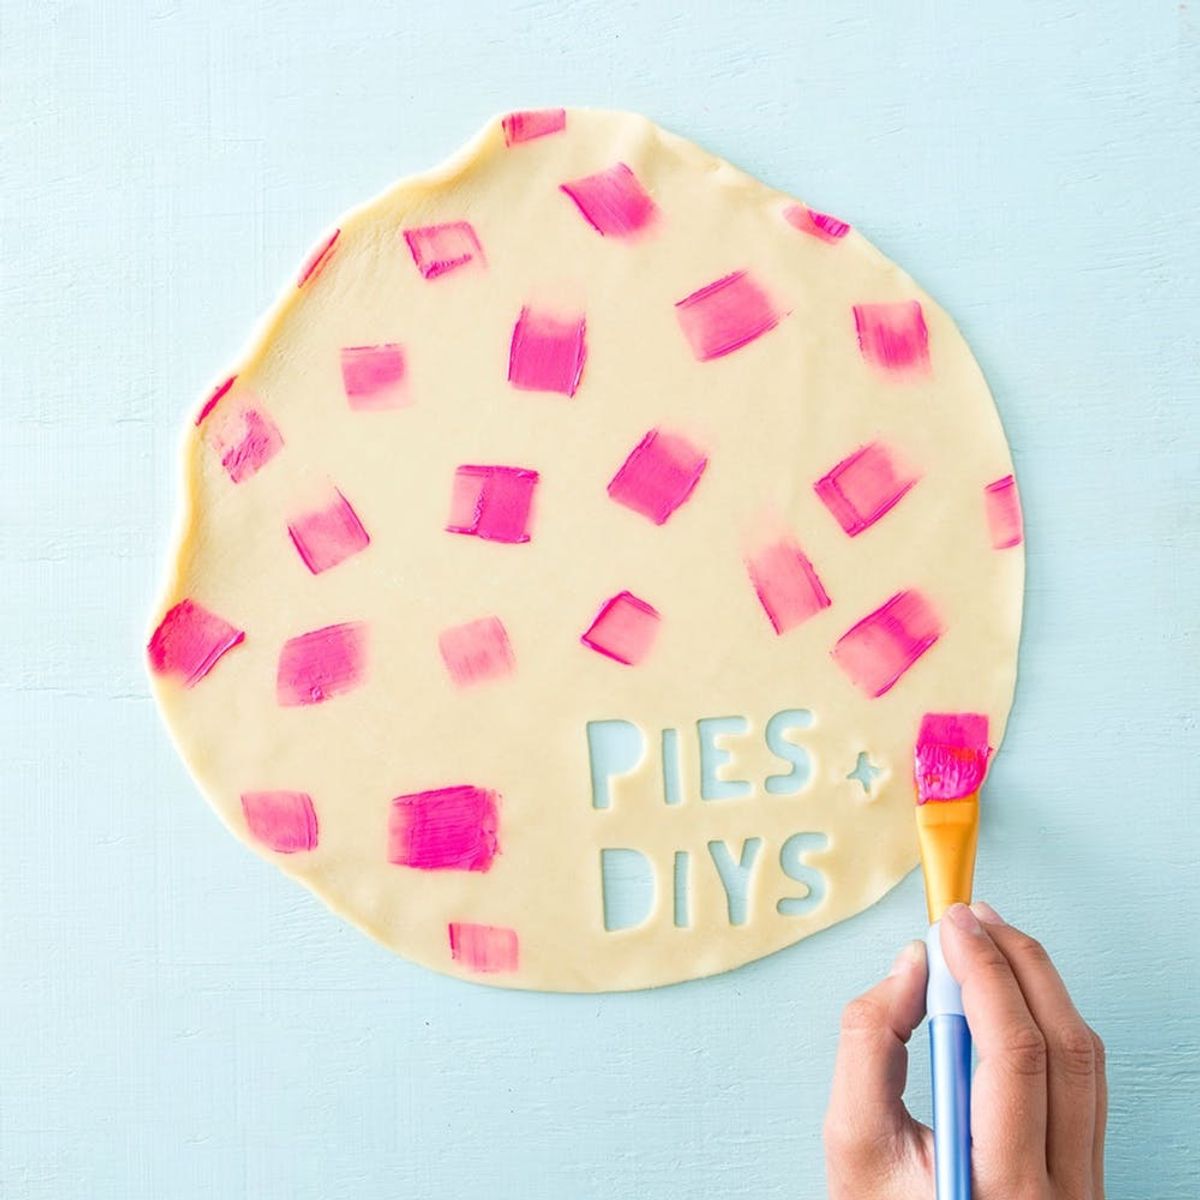 Pies + DIYs: No-Sew Makeup Pouch to Head Into the New School Year